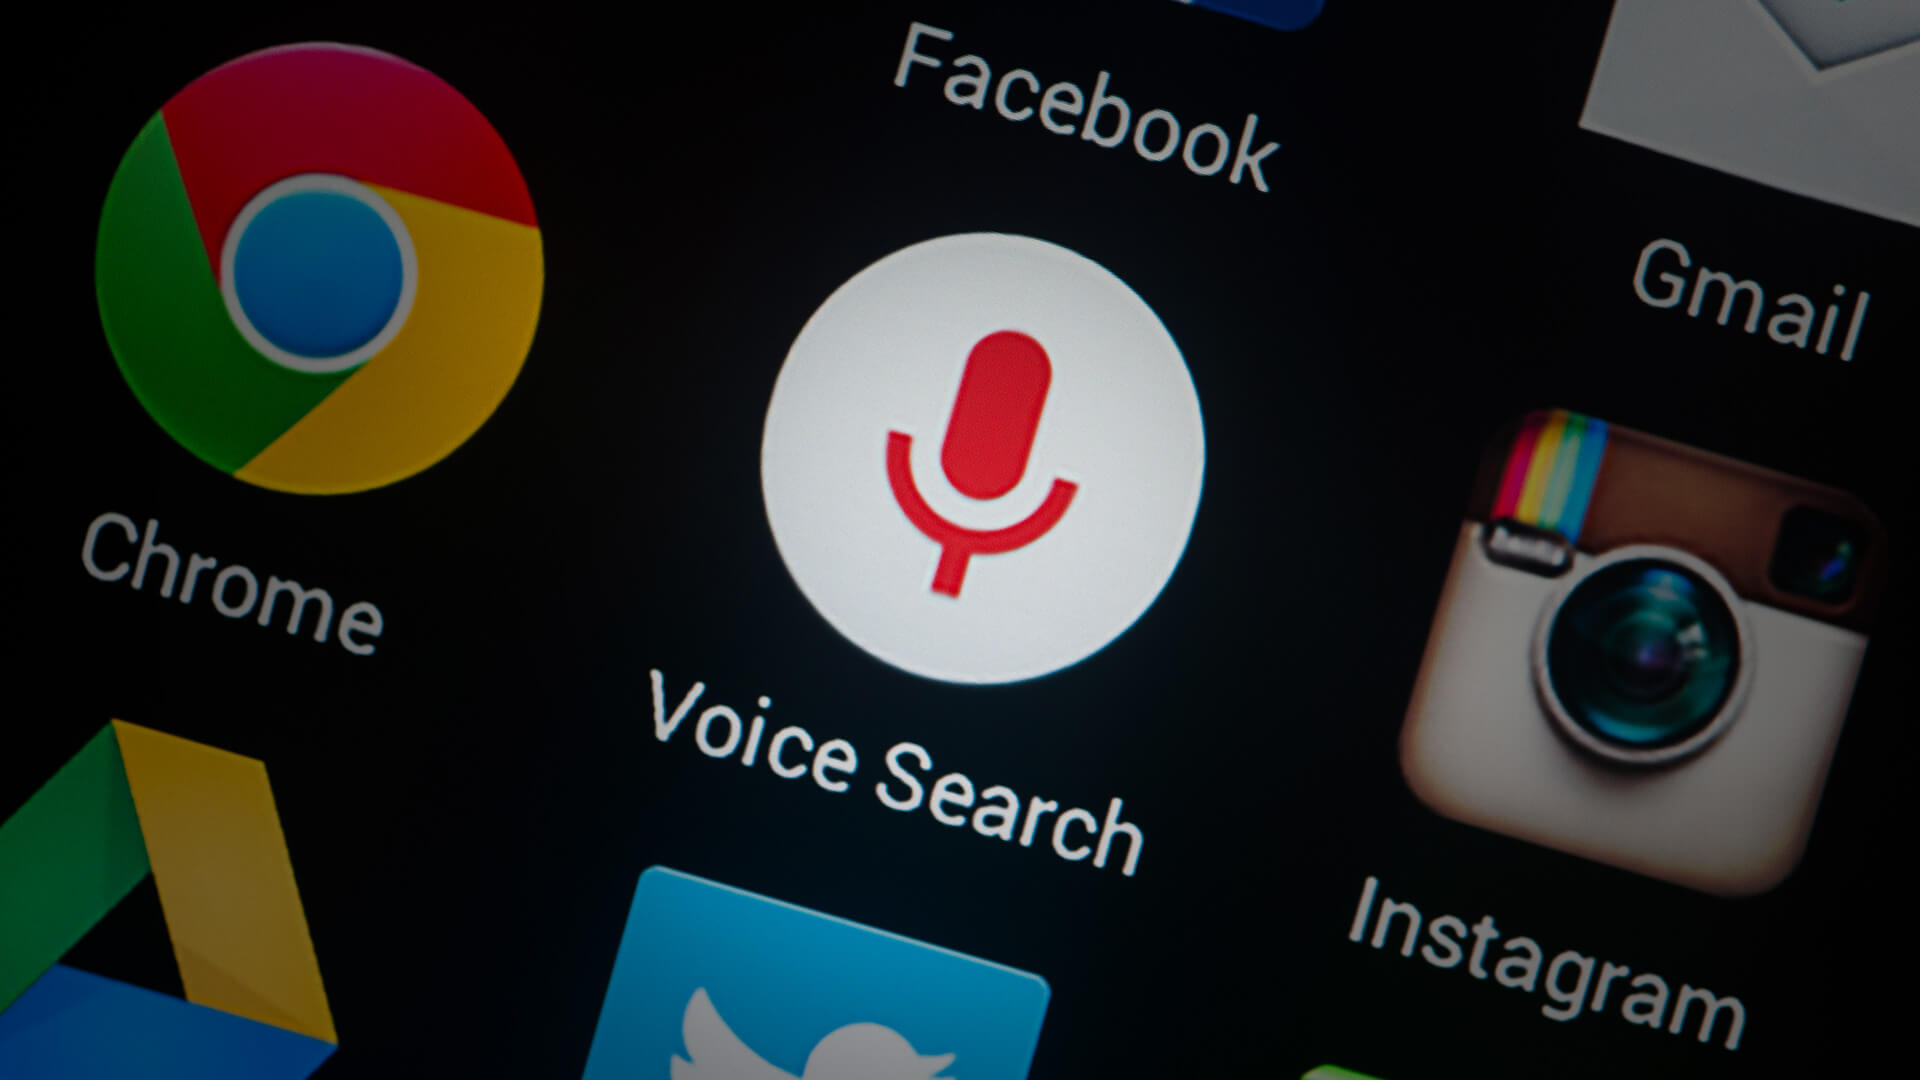 Our Love for Voice Search